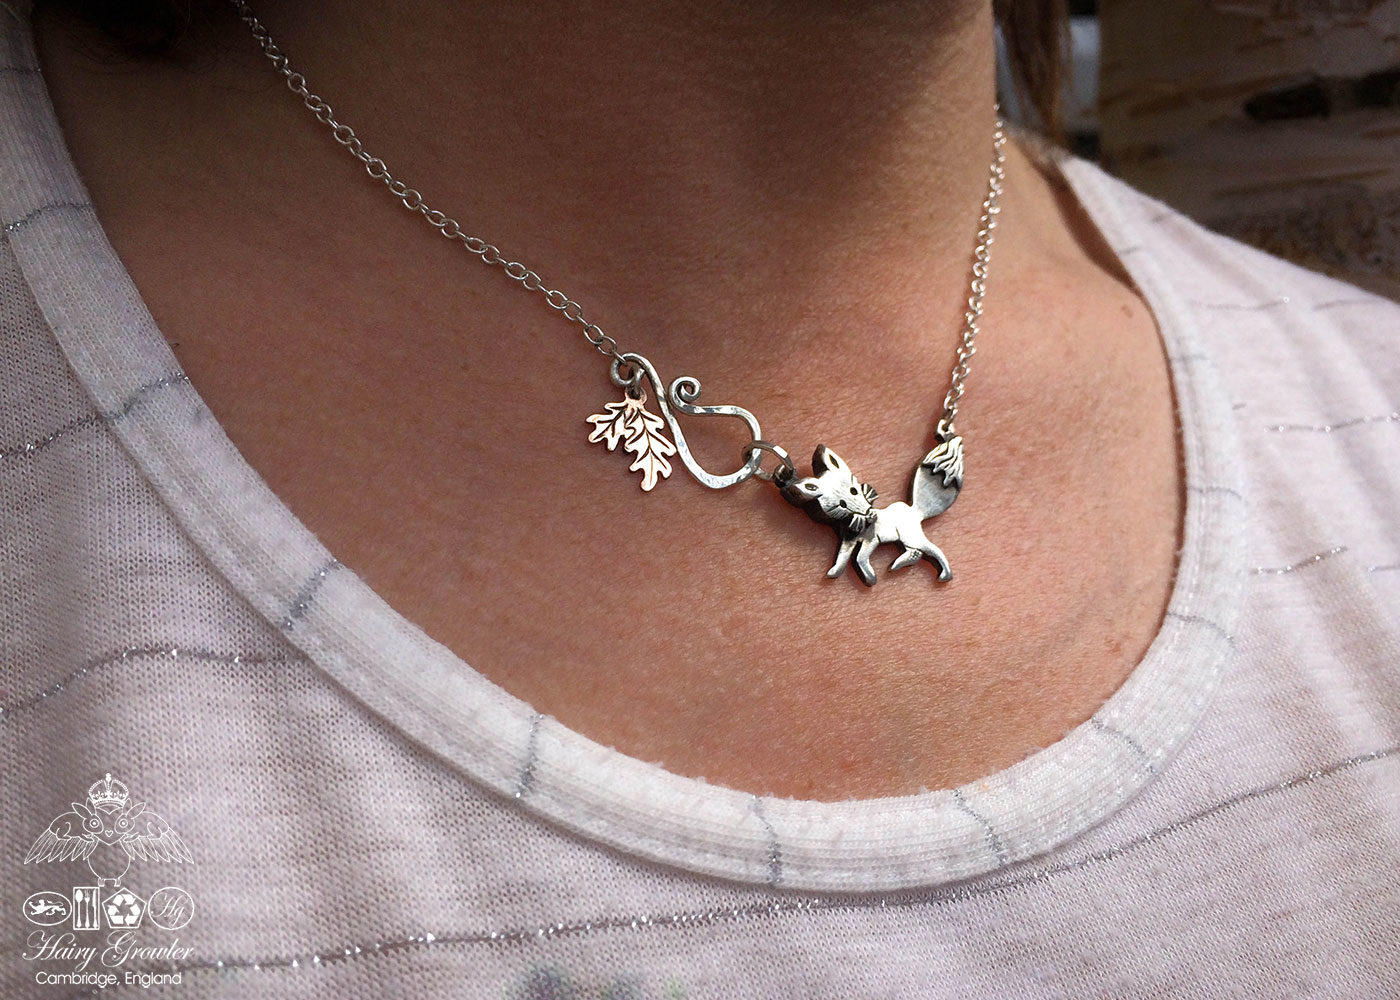 Handmade and upcycled silver curious fox necklace made from silver coins